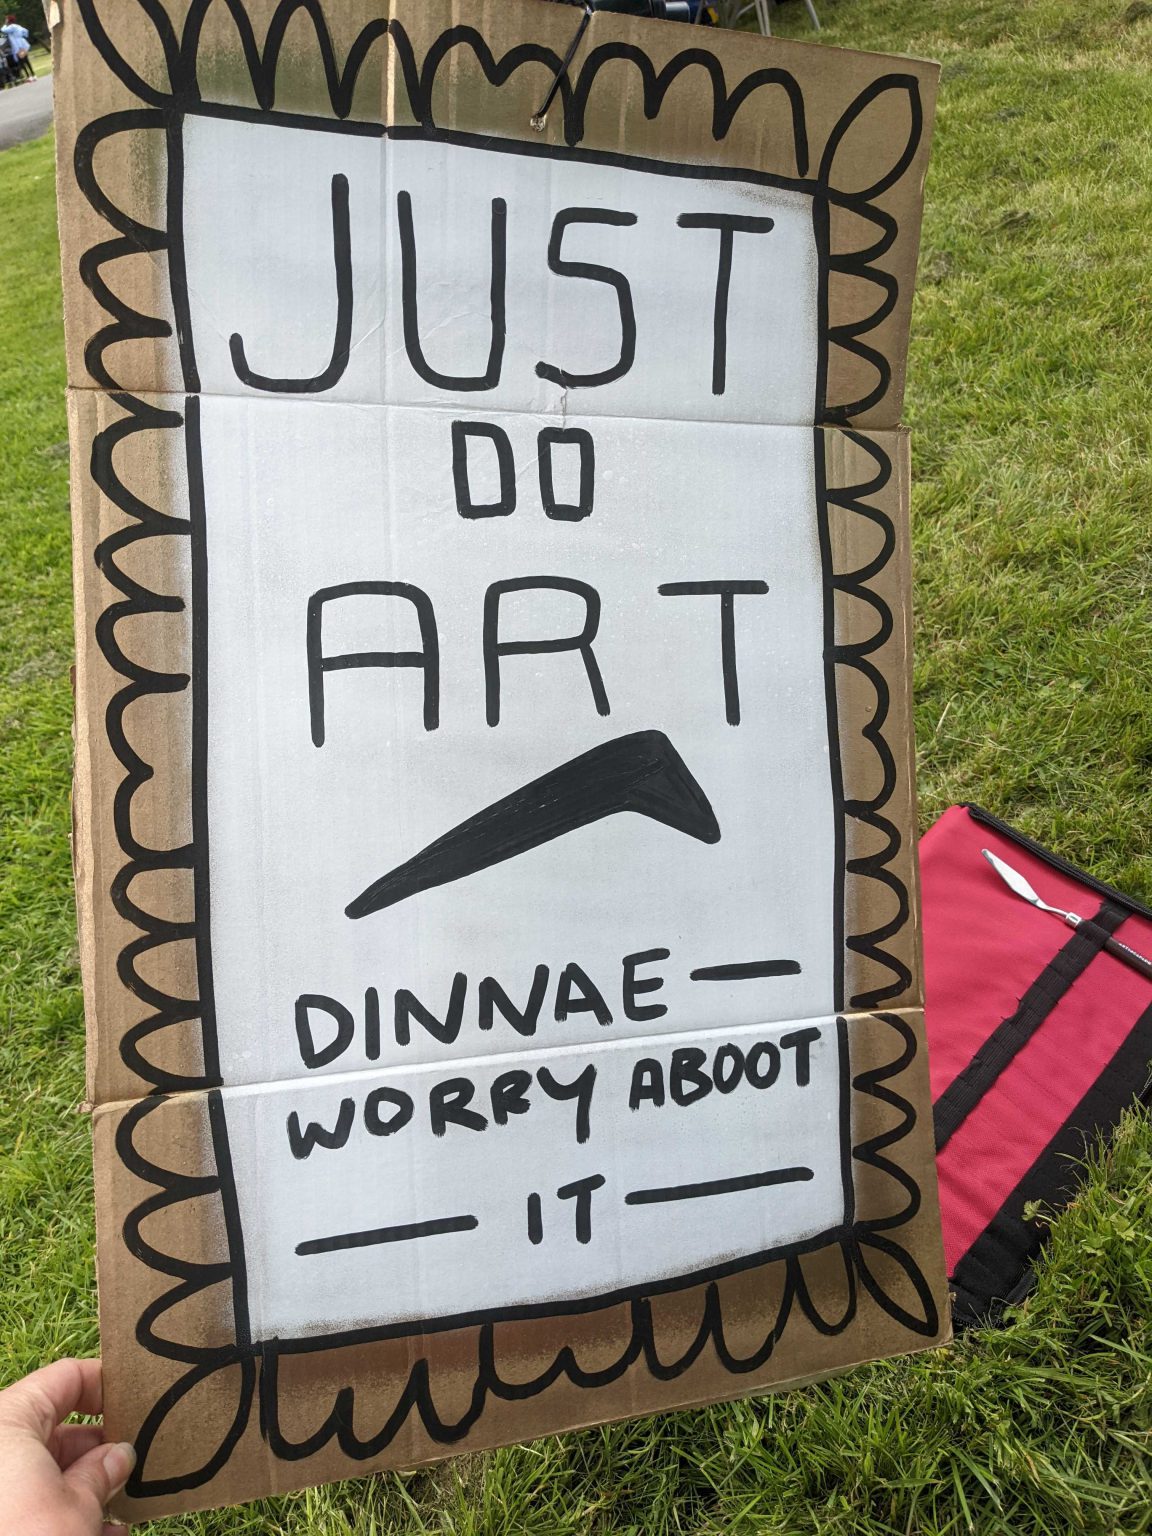 A brown cardboard sign with the words "Just do art, dinnae worry about it" and an upside-down nike-style tick.